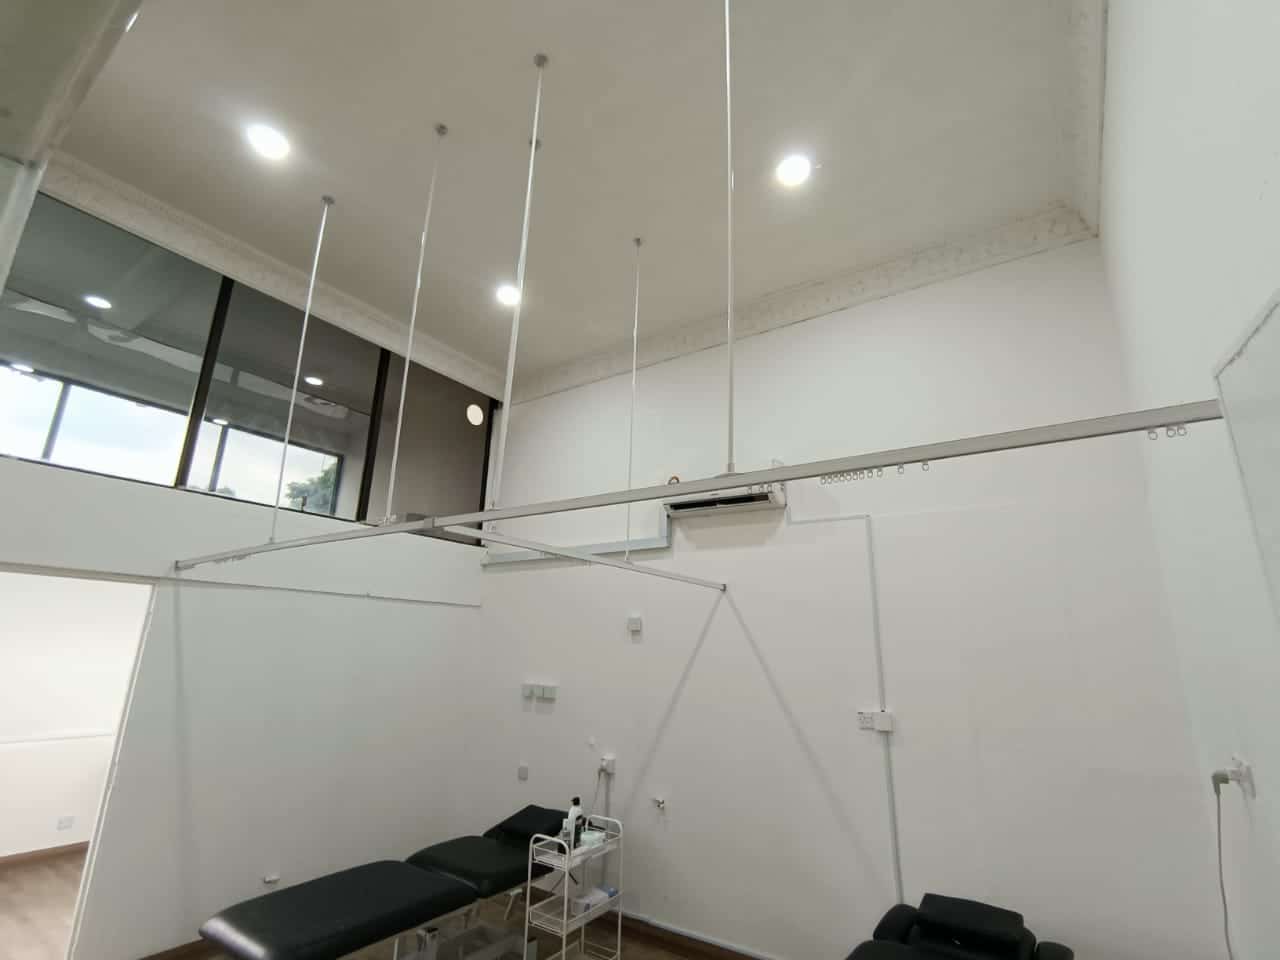 hospital cubicle medical suspended curtain tracks